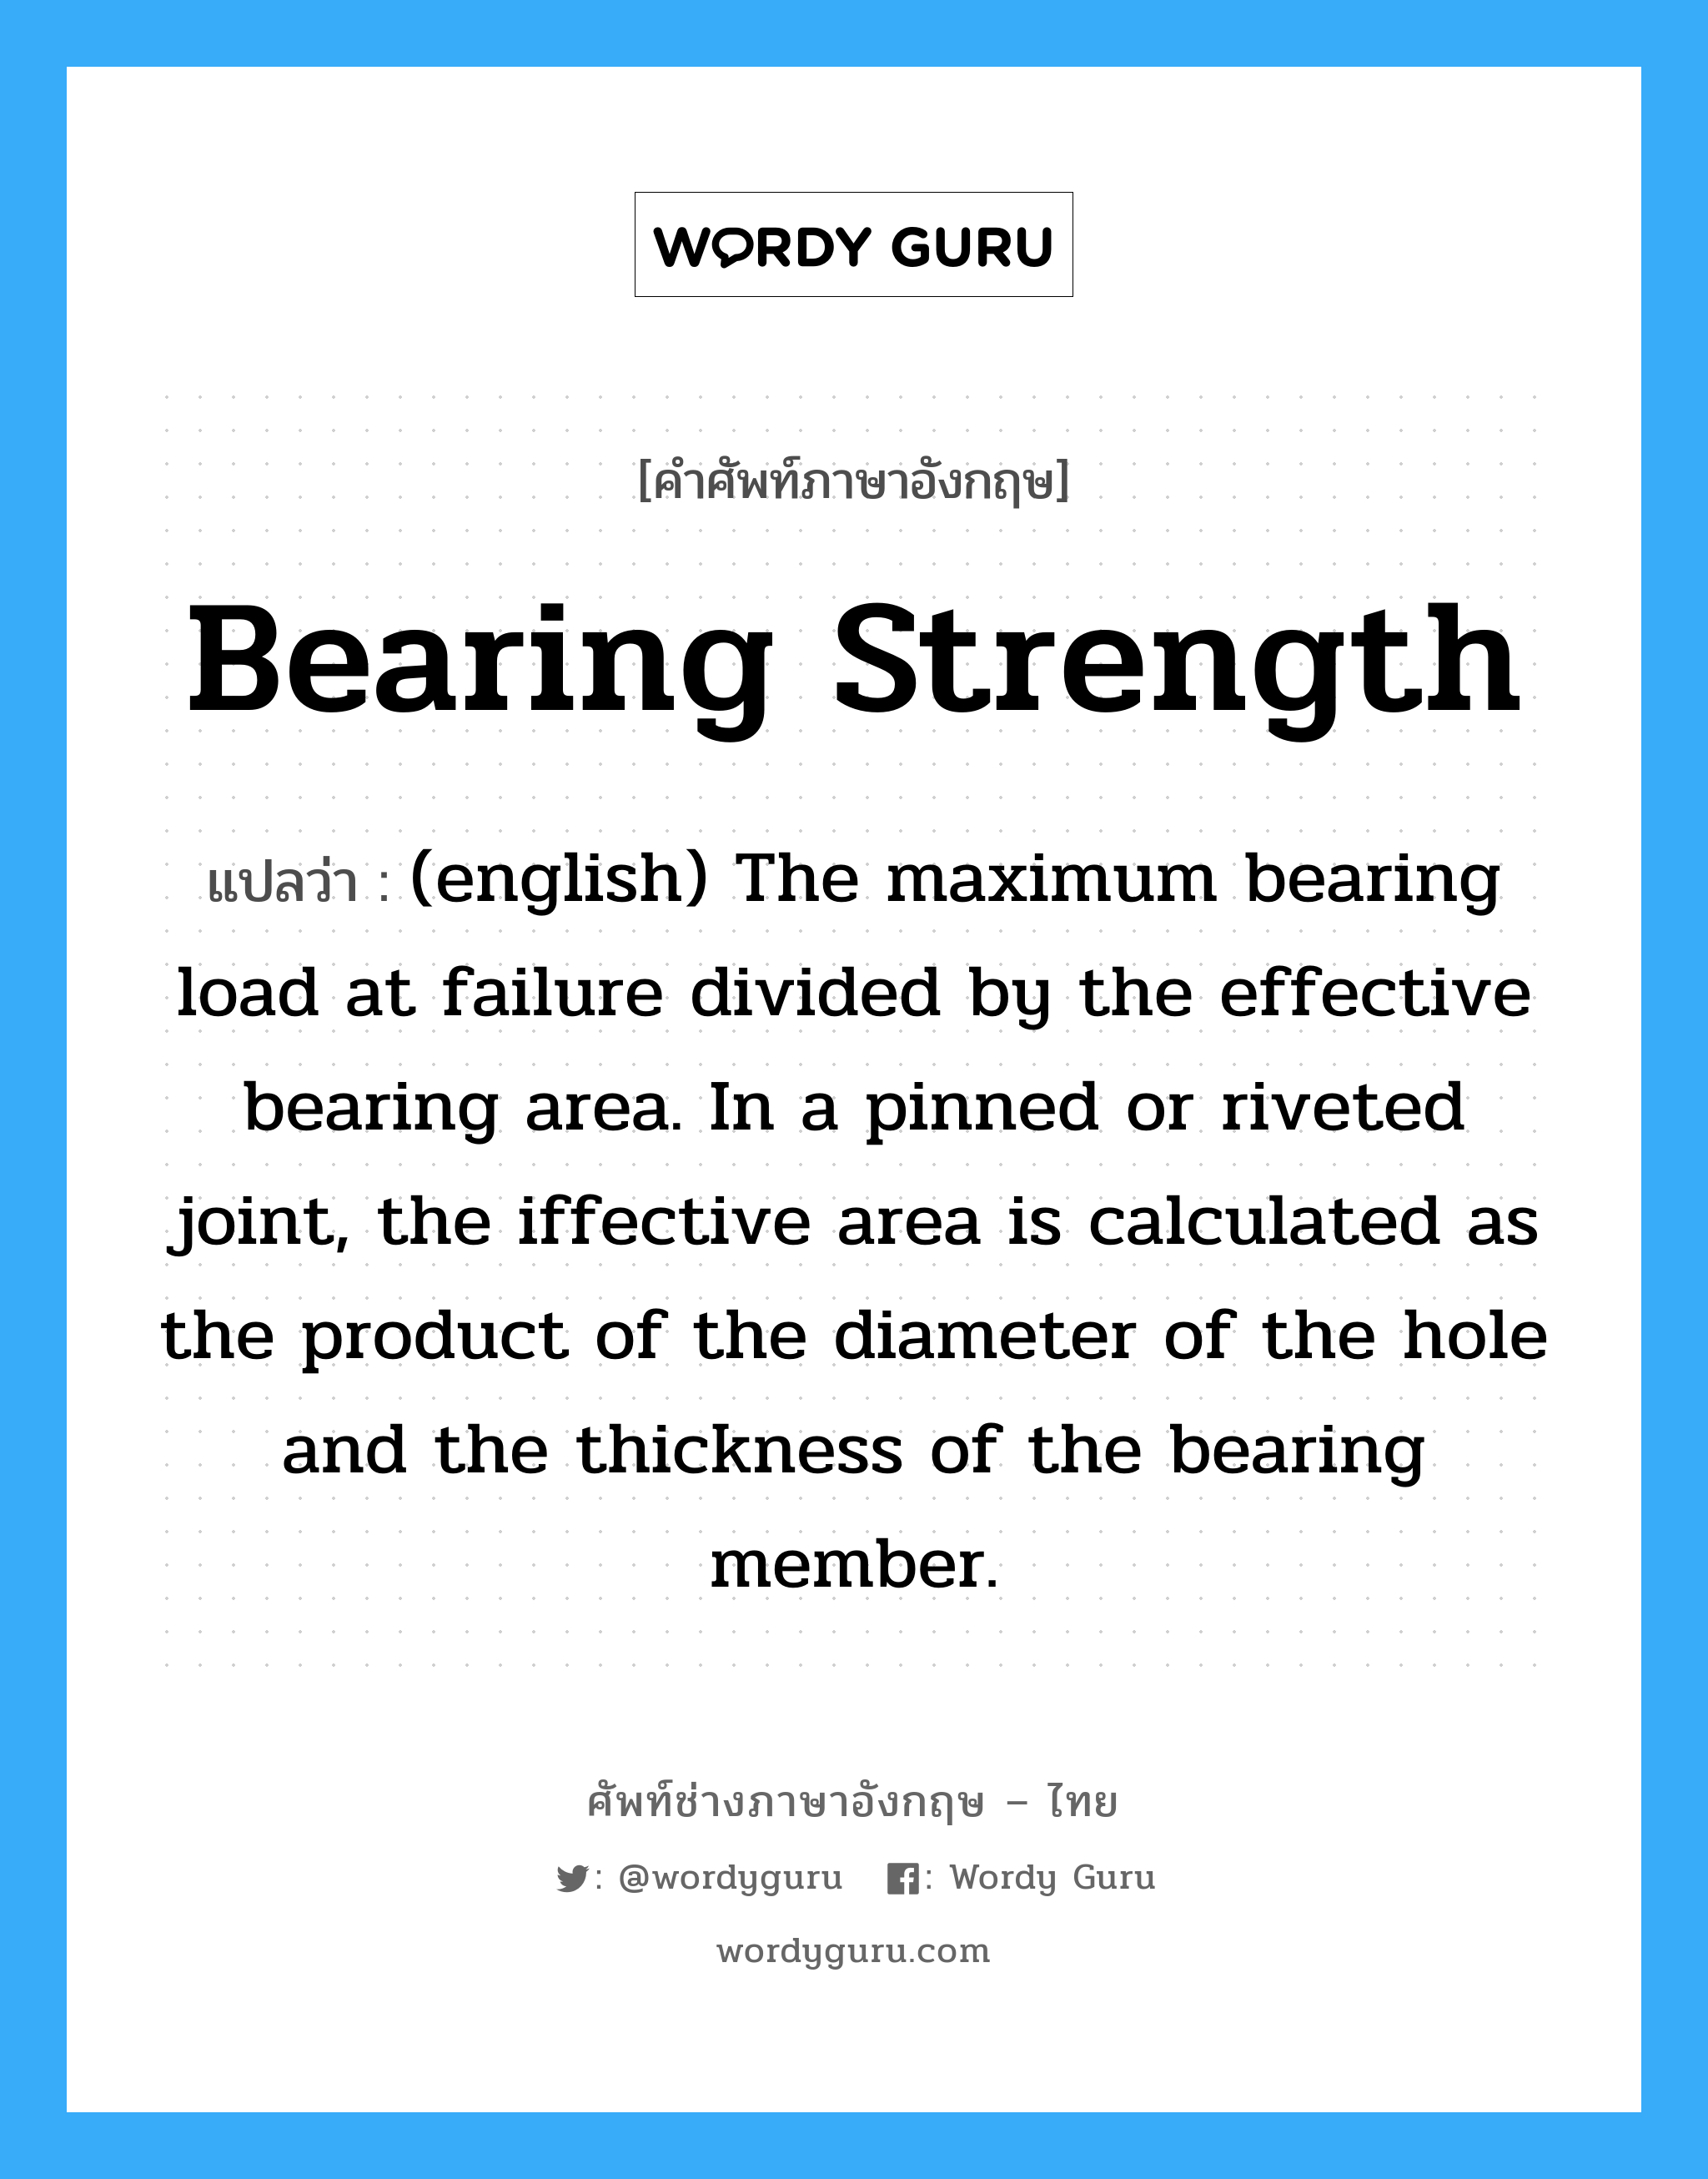 Bearing Strength แปลว่า?, คำศัพท์ช่างภาษาอังกฤษ - ไทย Bearing Strength คำศัพท์ภาษาอังกฤษ Bearing Strength แปลว่า (english) The maximum bearing load at failure divided by the effective bearing area. In a pinned or riveted joint, the iffective area is calculated as the product of the diameter of the hole and the thickness of the bearing member.